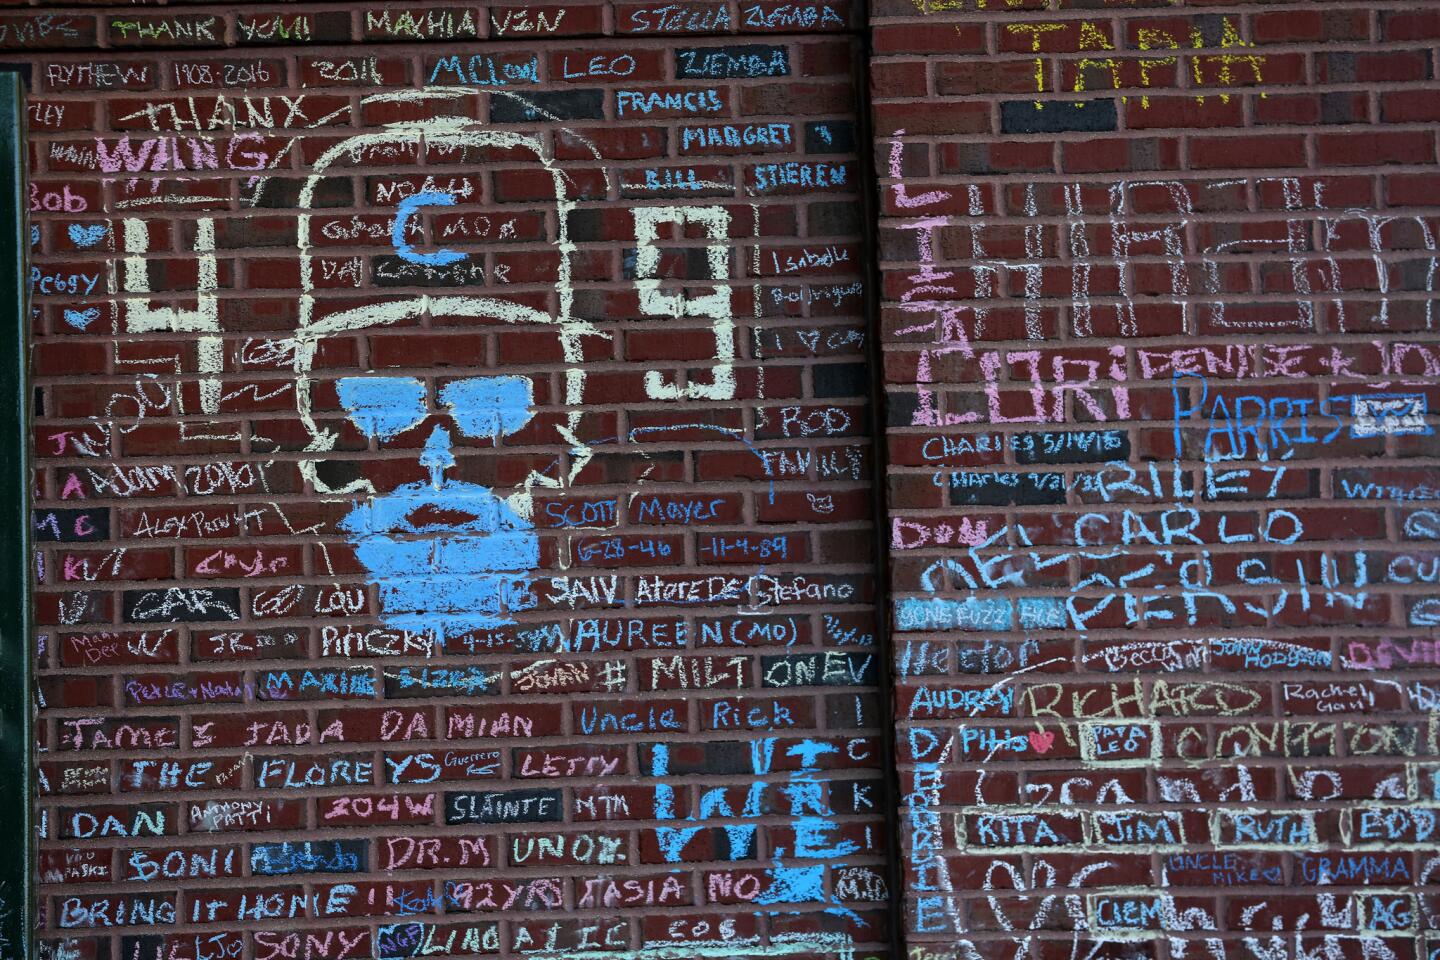 An image of Cubs manager Joe Maddon is chalked onto the wall on Waveland Avenue near the gate to the bleachers. Large crowds of fans showed up at Wrigley Field in Chicago to add to the chalk wall and take photos on Nov. 6, 2016.